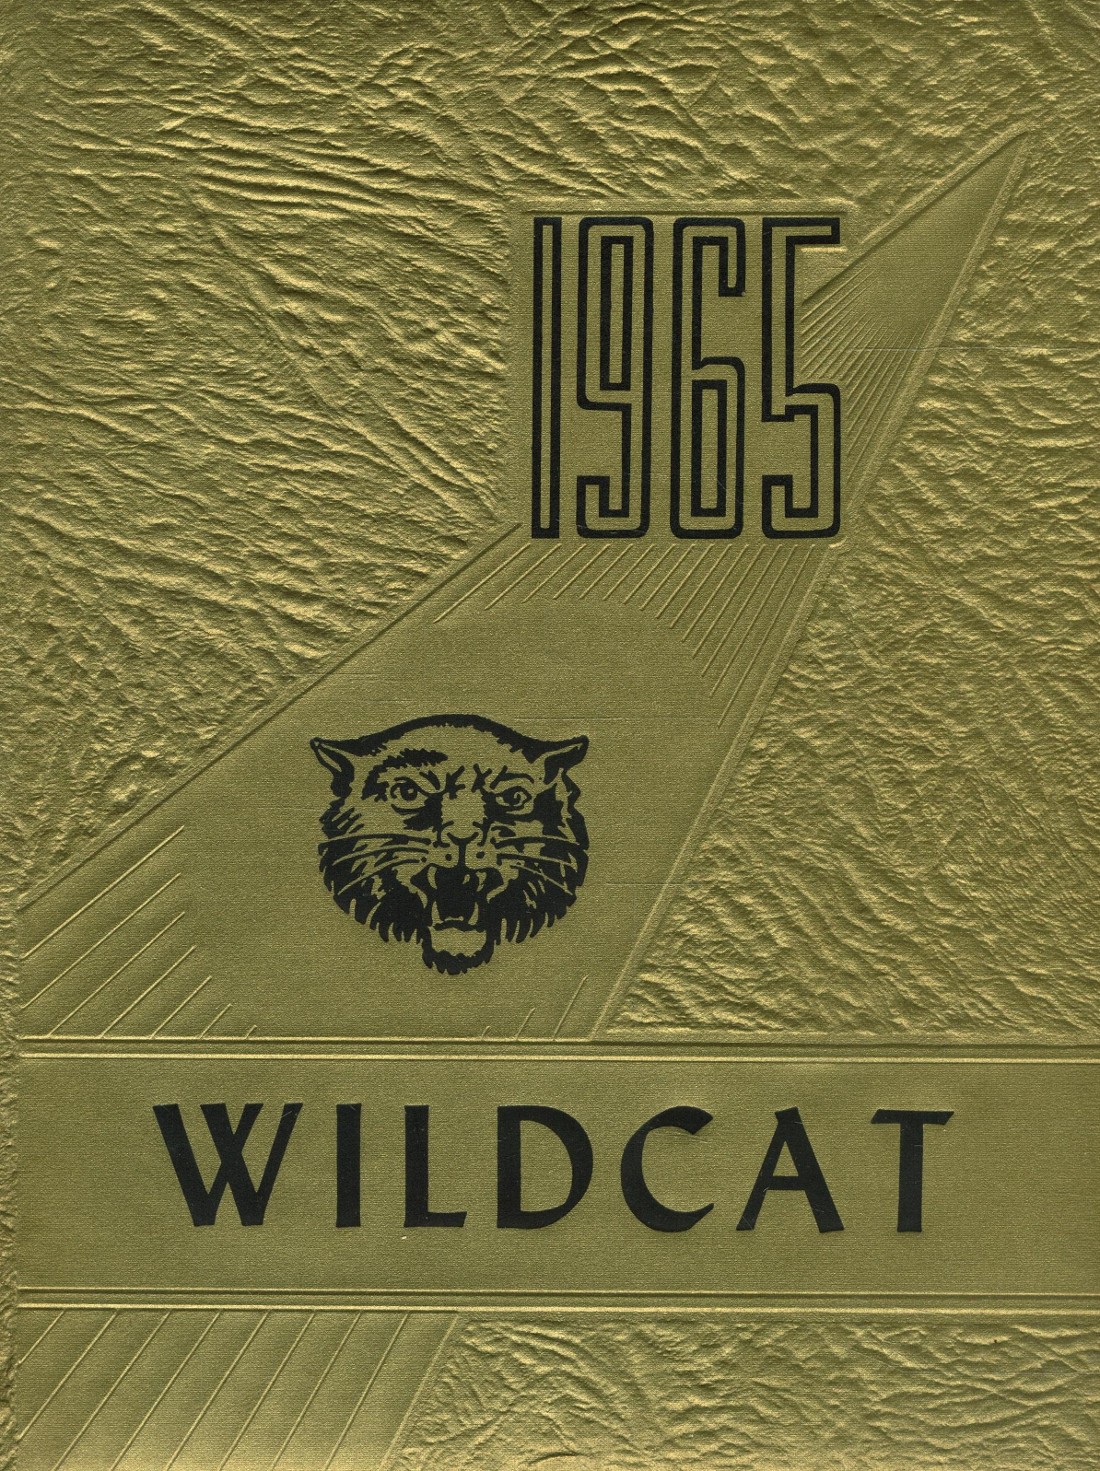 1965 yearbook from Sweetwater High School from Sweetwater, Tennessee ...